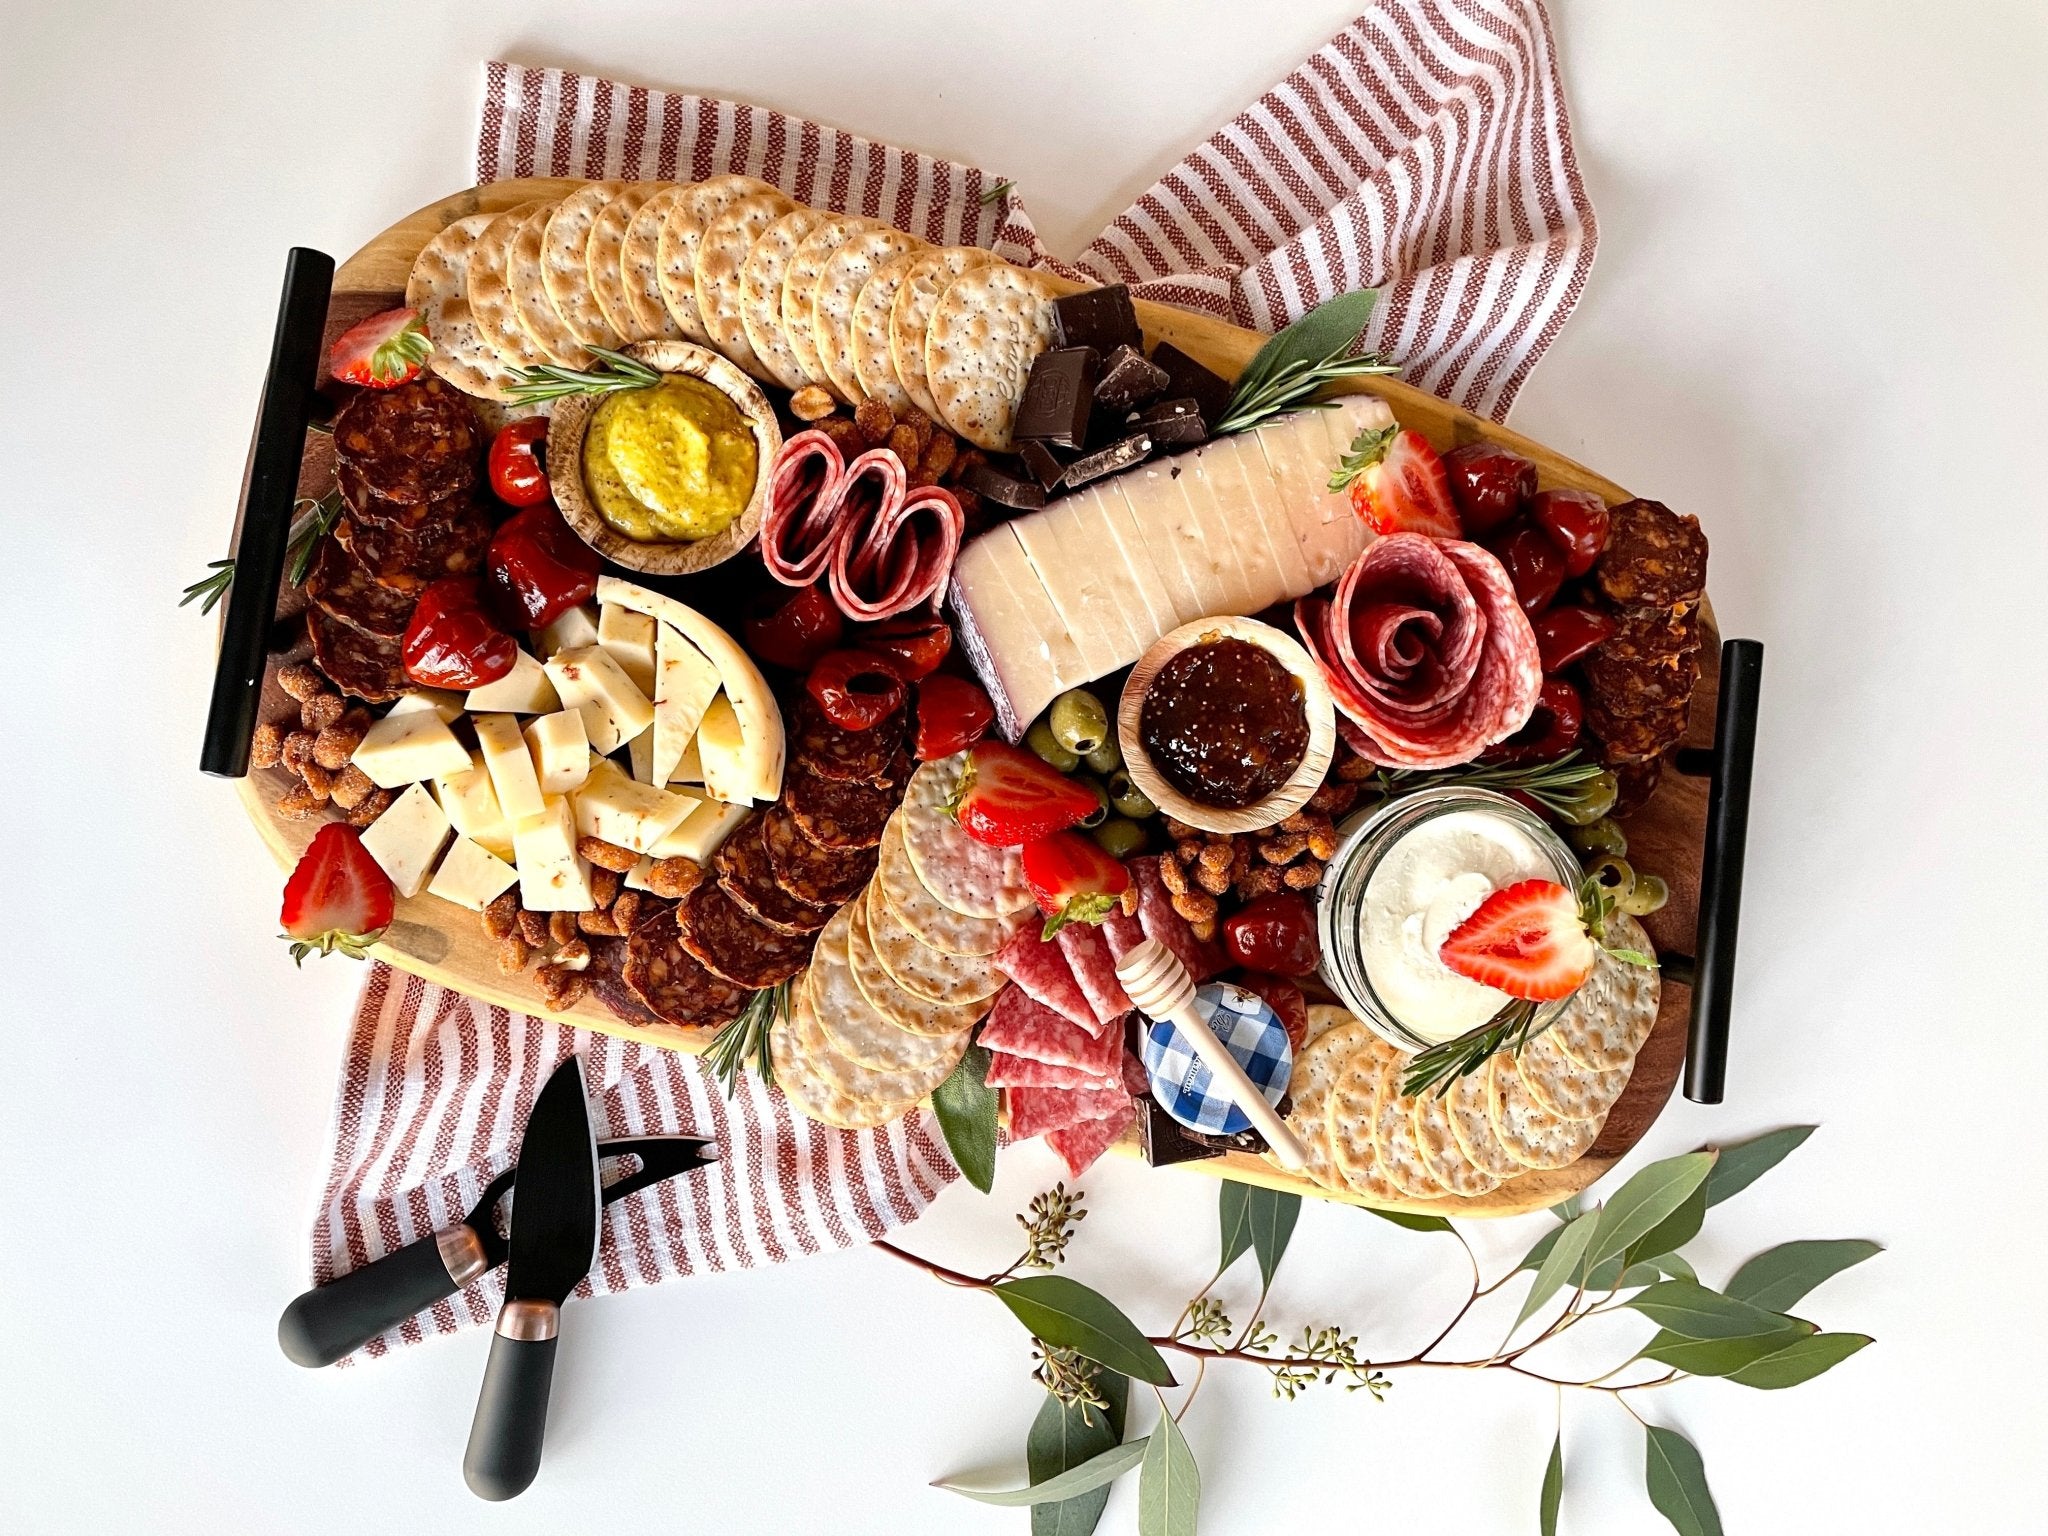 How to Make the Ultimate Charcuterie Board